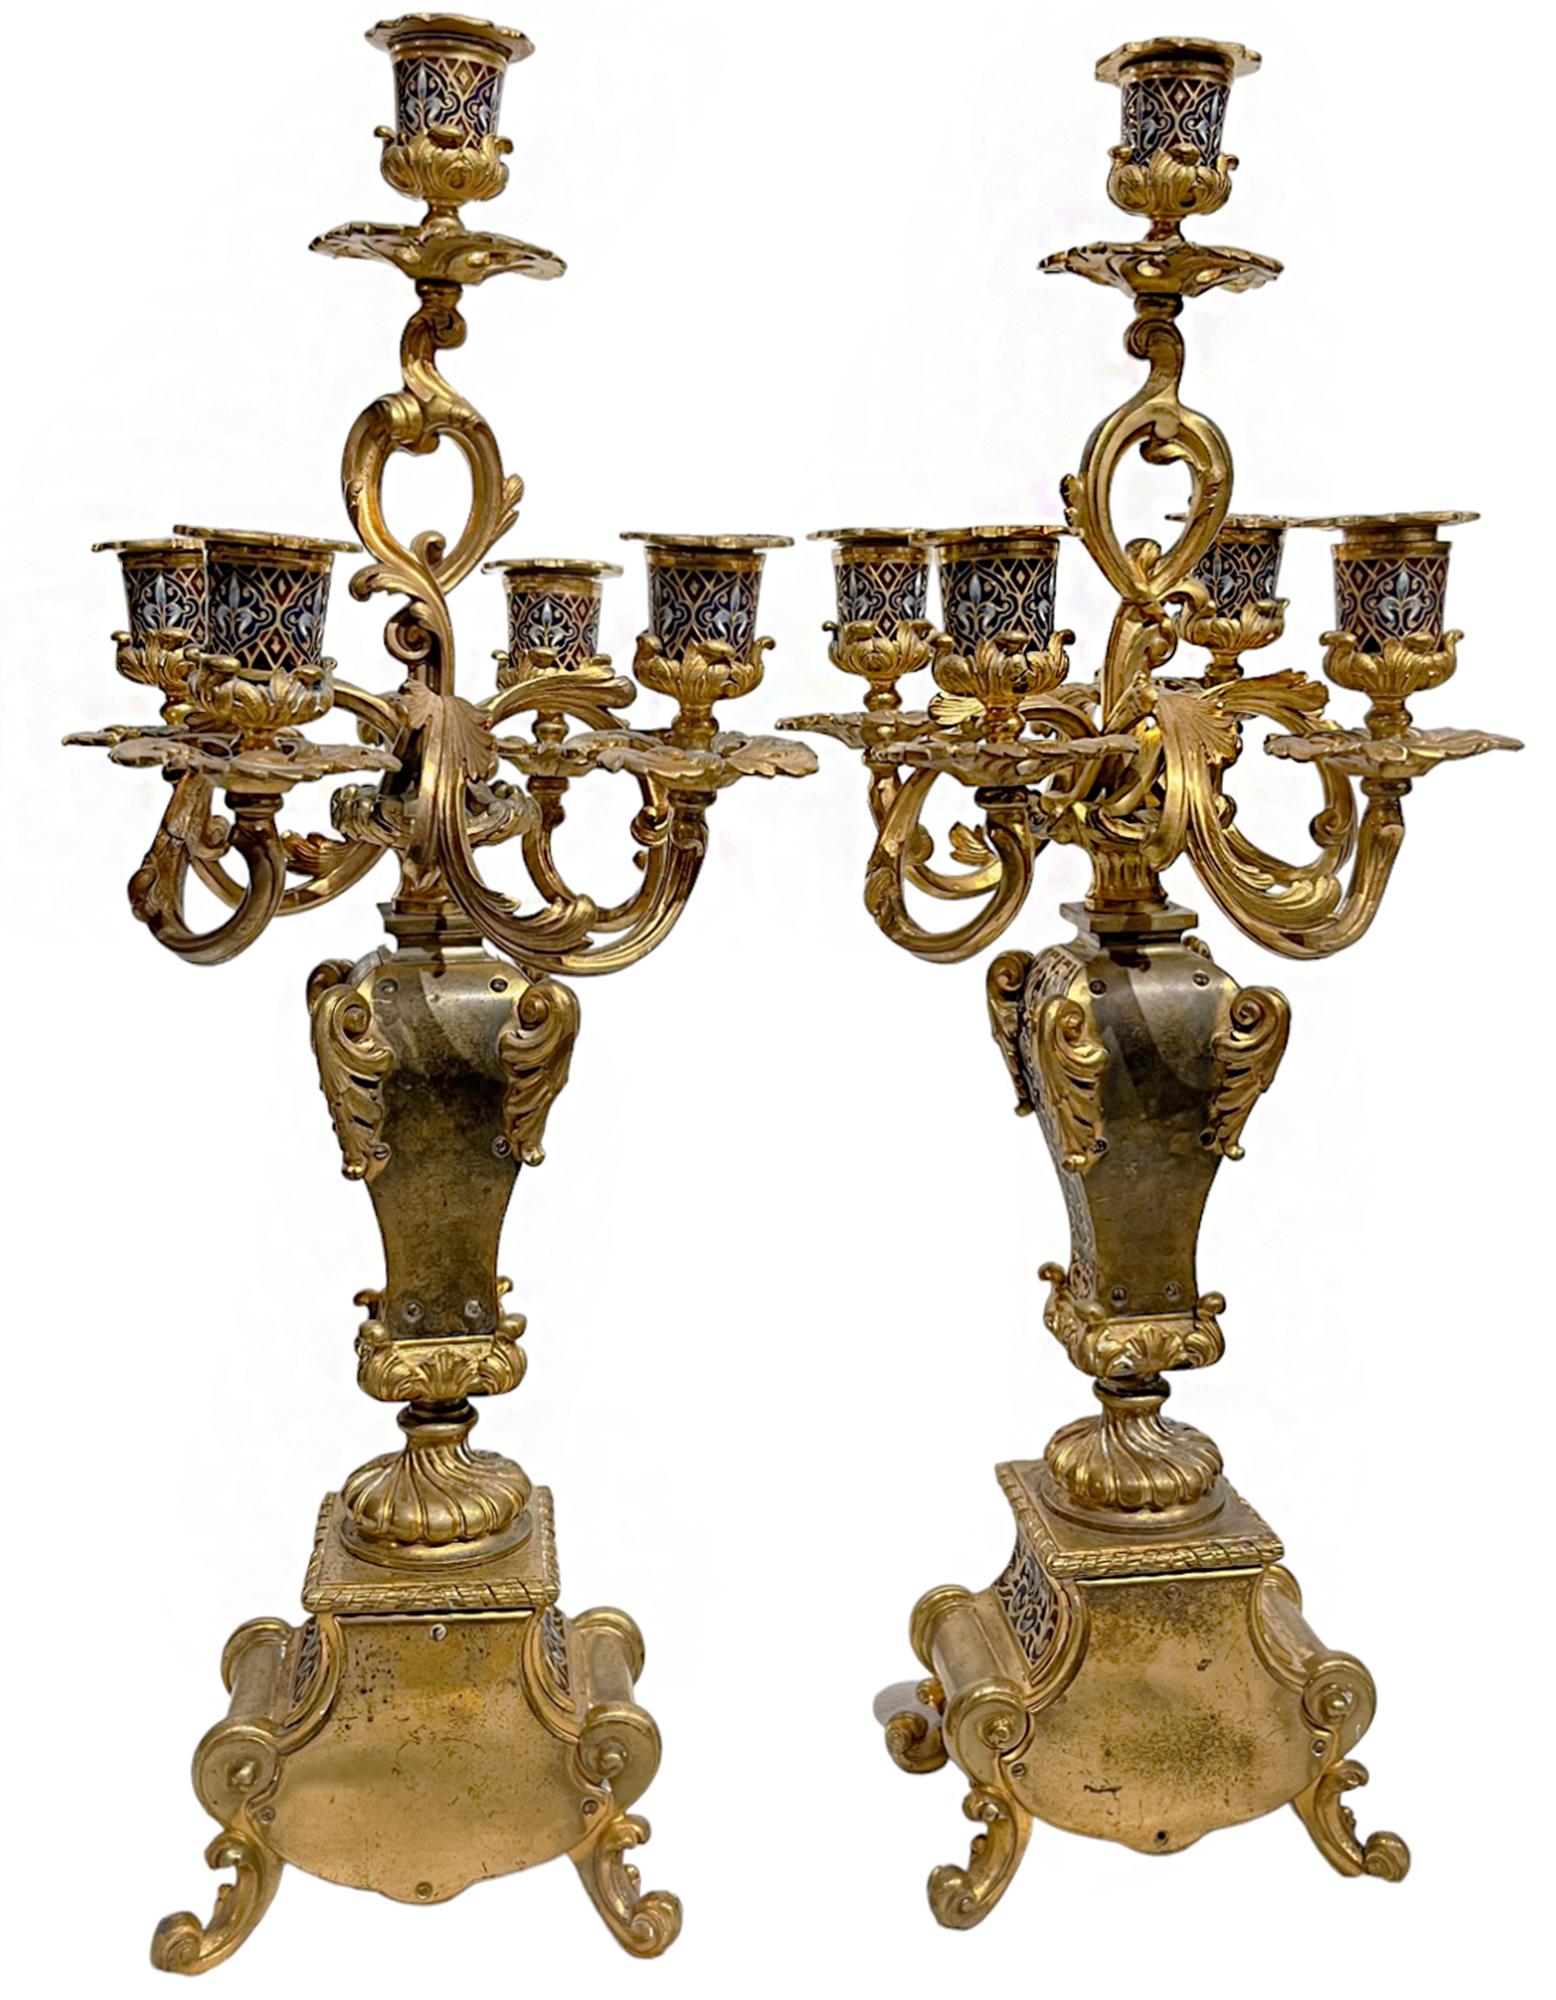 Pair of Champlevé and Gilt-bronze Five-light Candelabra For Sale 2